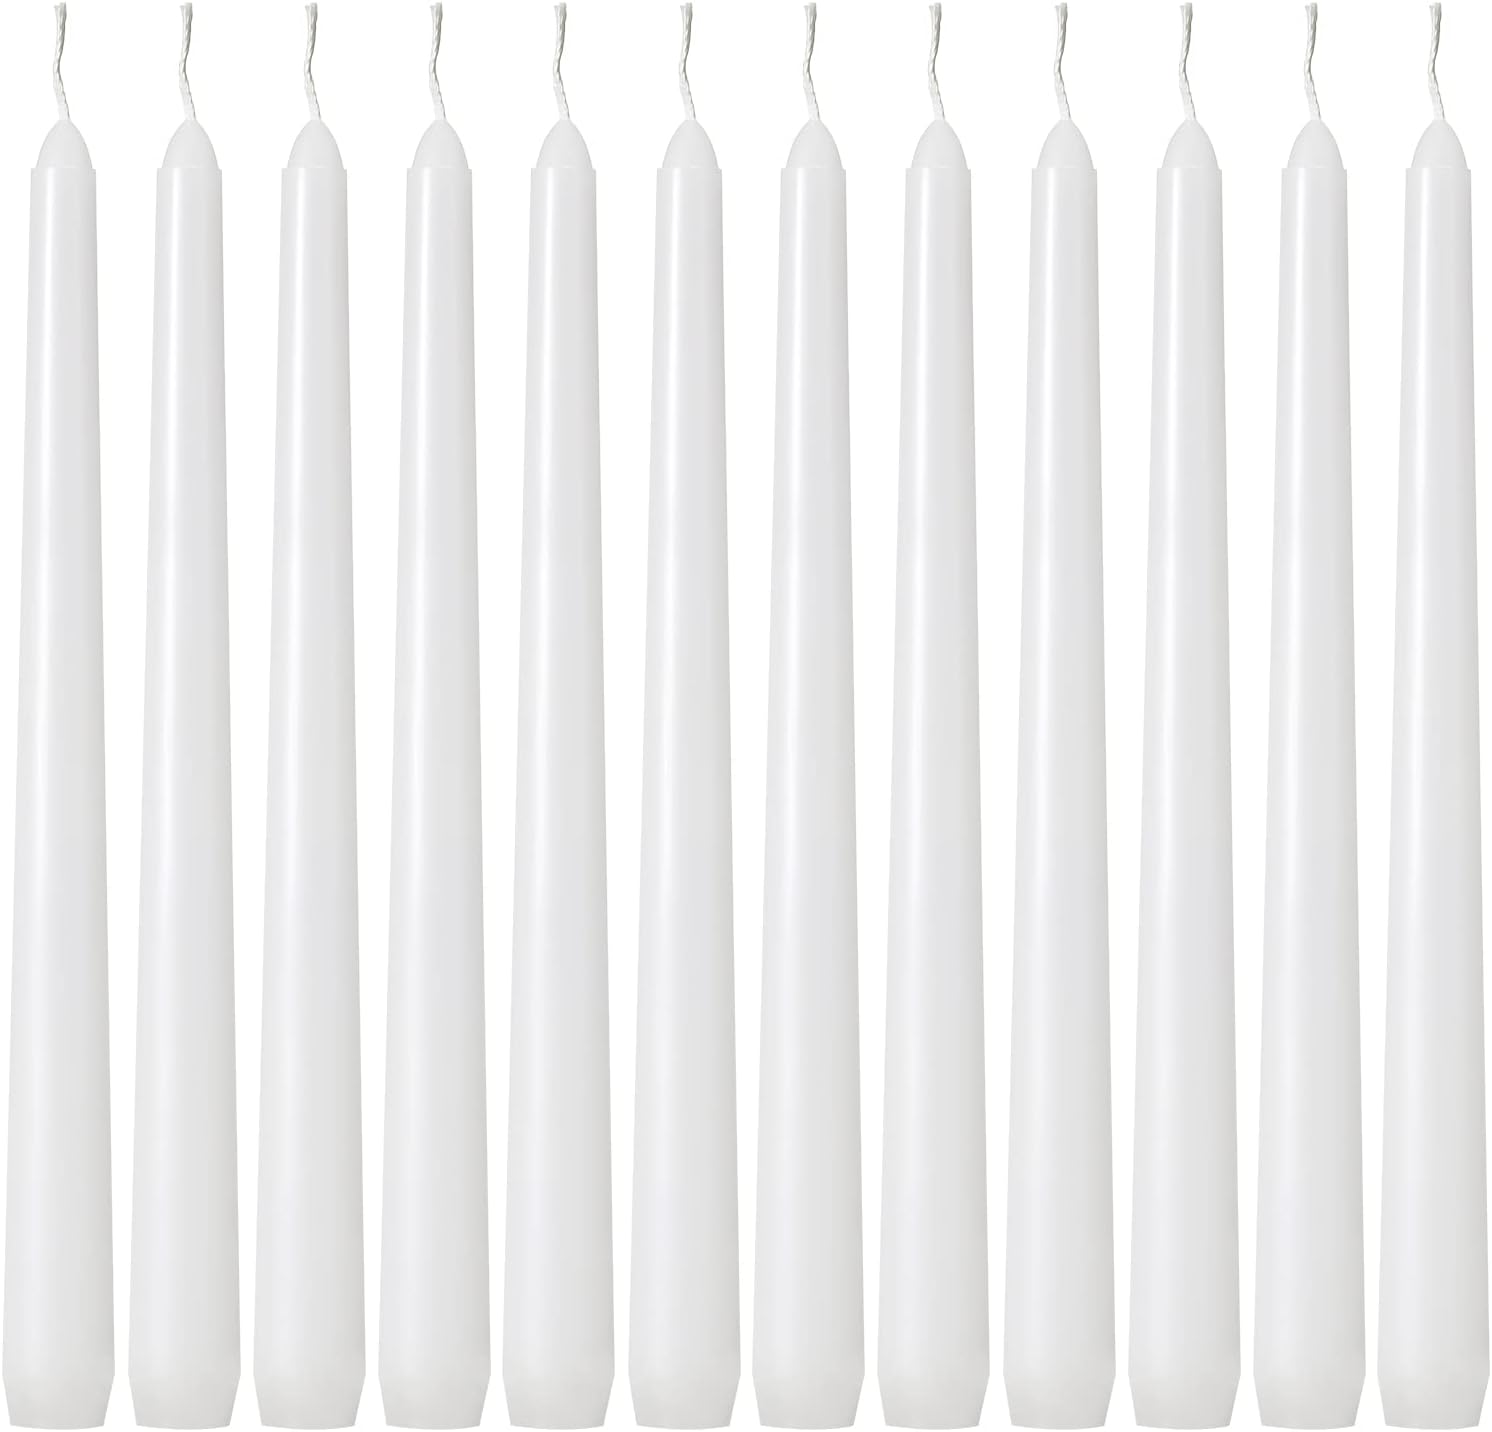 Kedtui Taper Candles 10 inch (H) Dripless, Set of 24 [...]